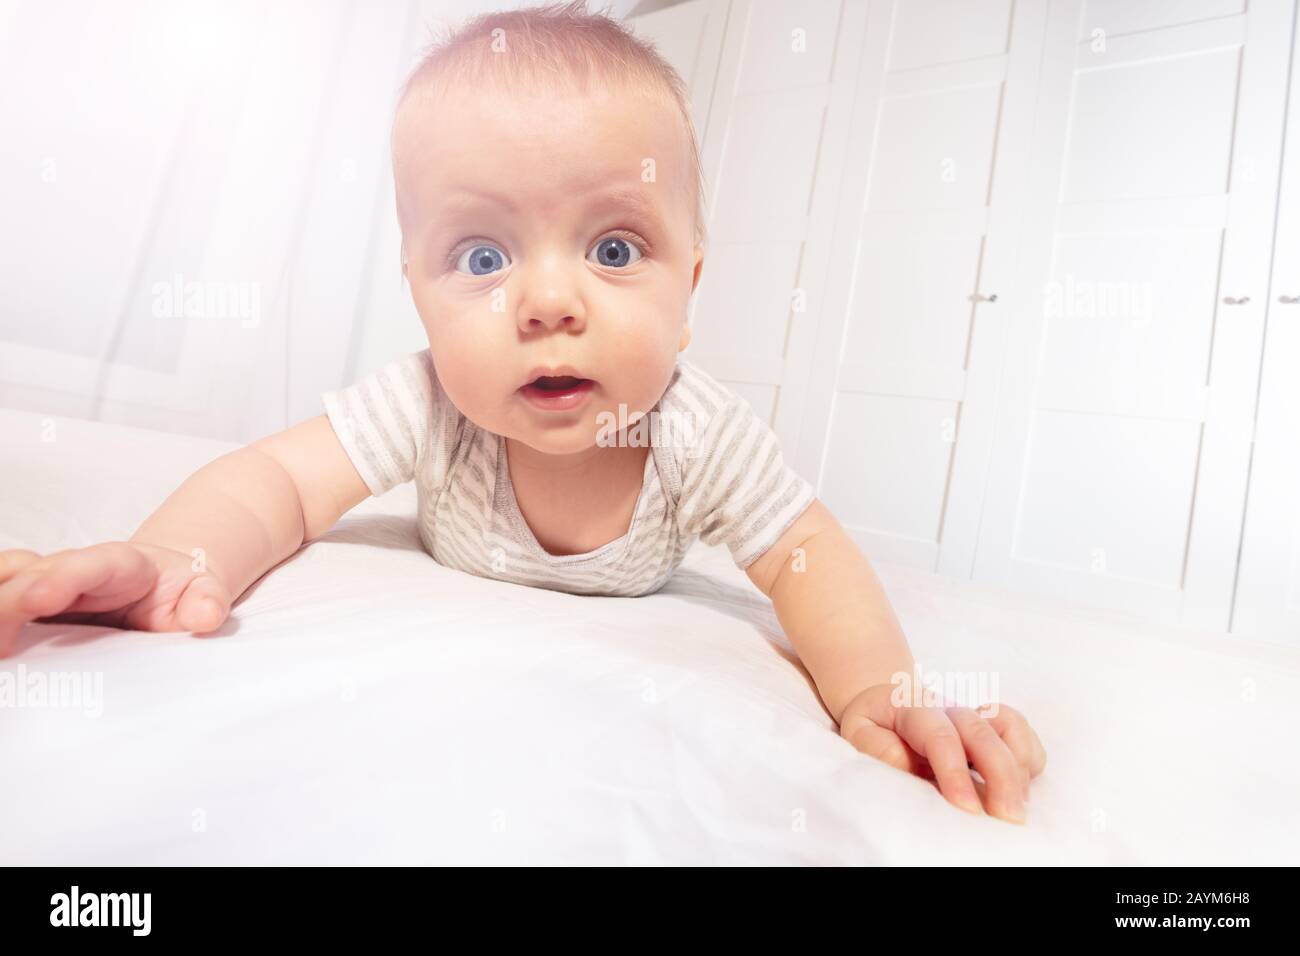 Cute little baby boy toddler learn to crawl view from low angle looking at camera Stock Photo